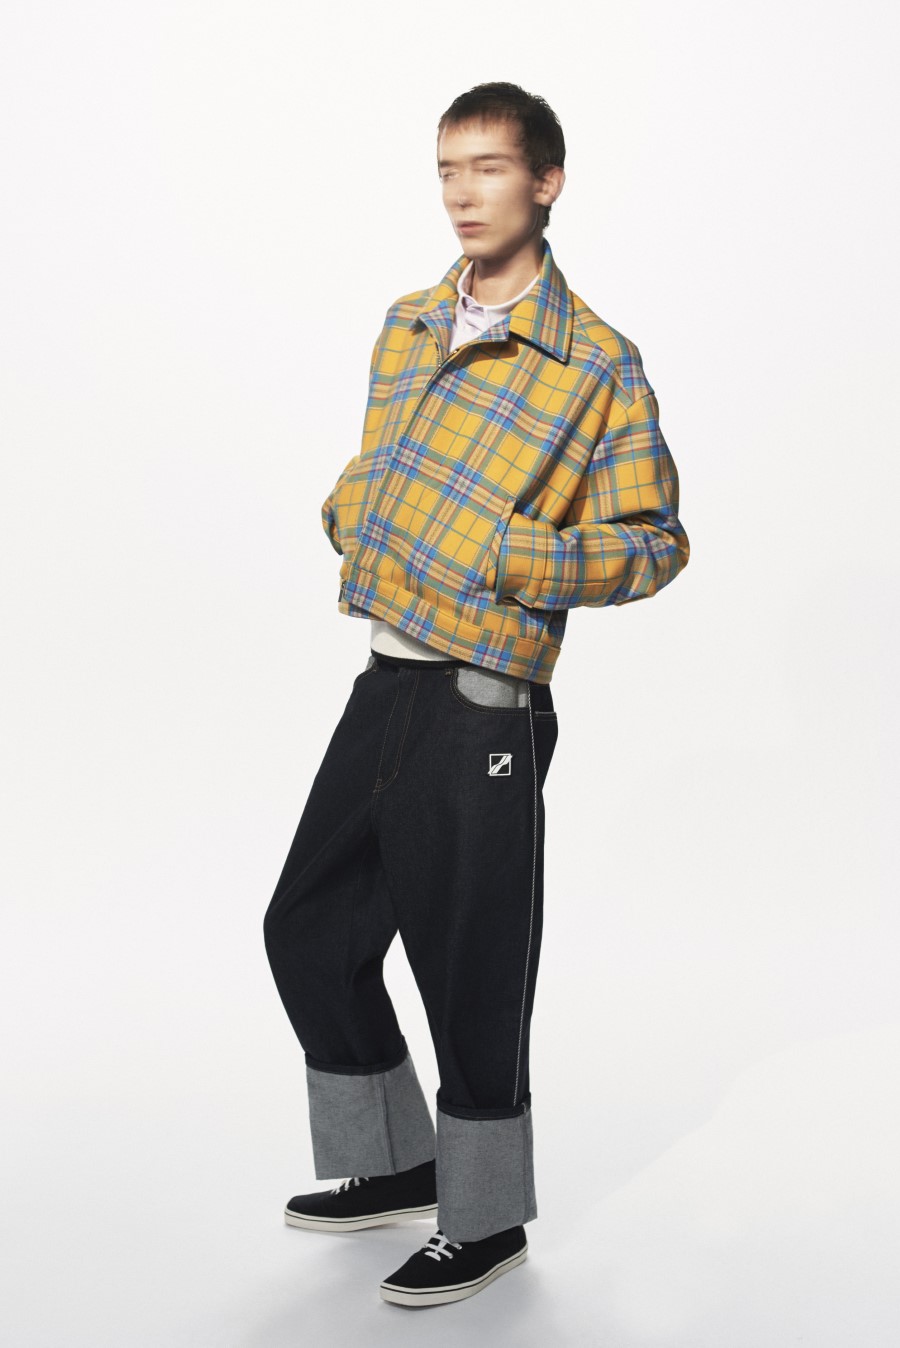 WE11DONE Women's Spring-Summer 2021 and Men's Pre-Fall 2021 Lookbook